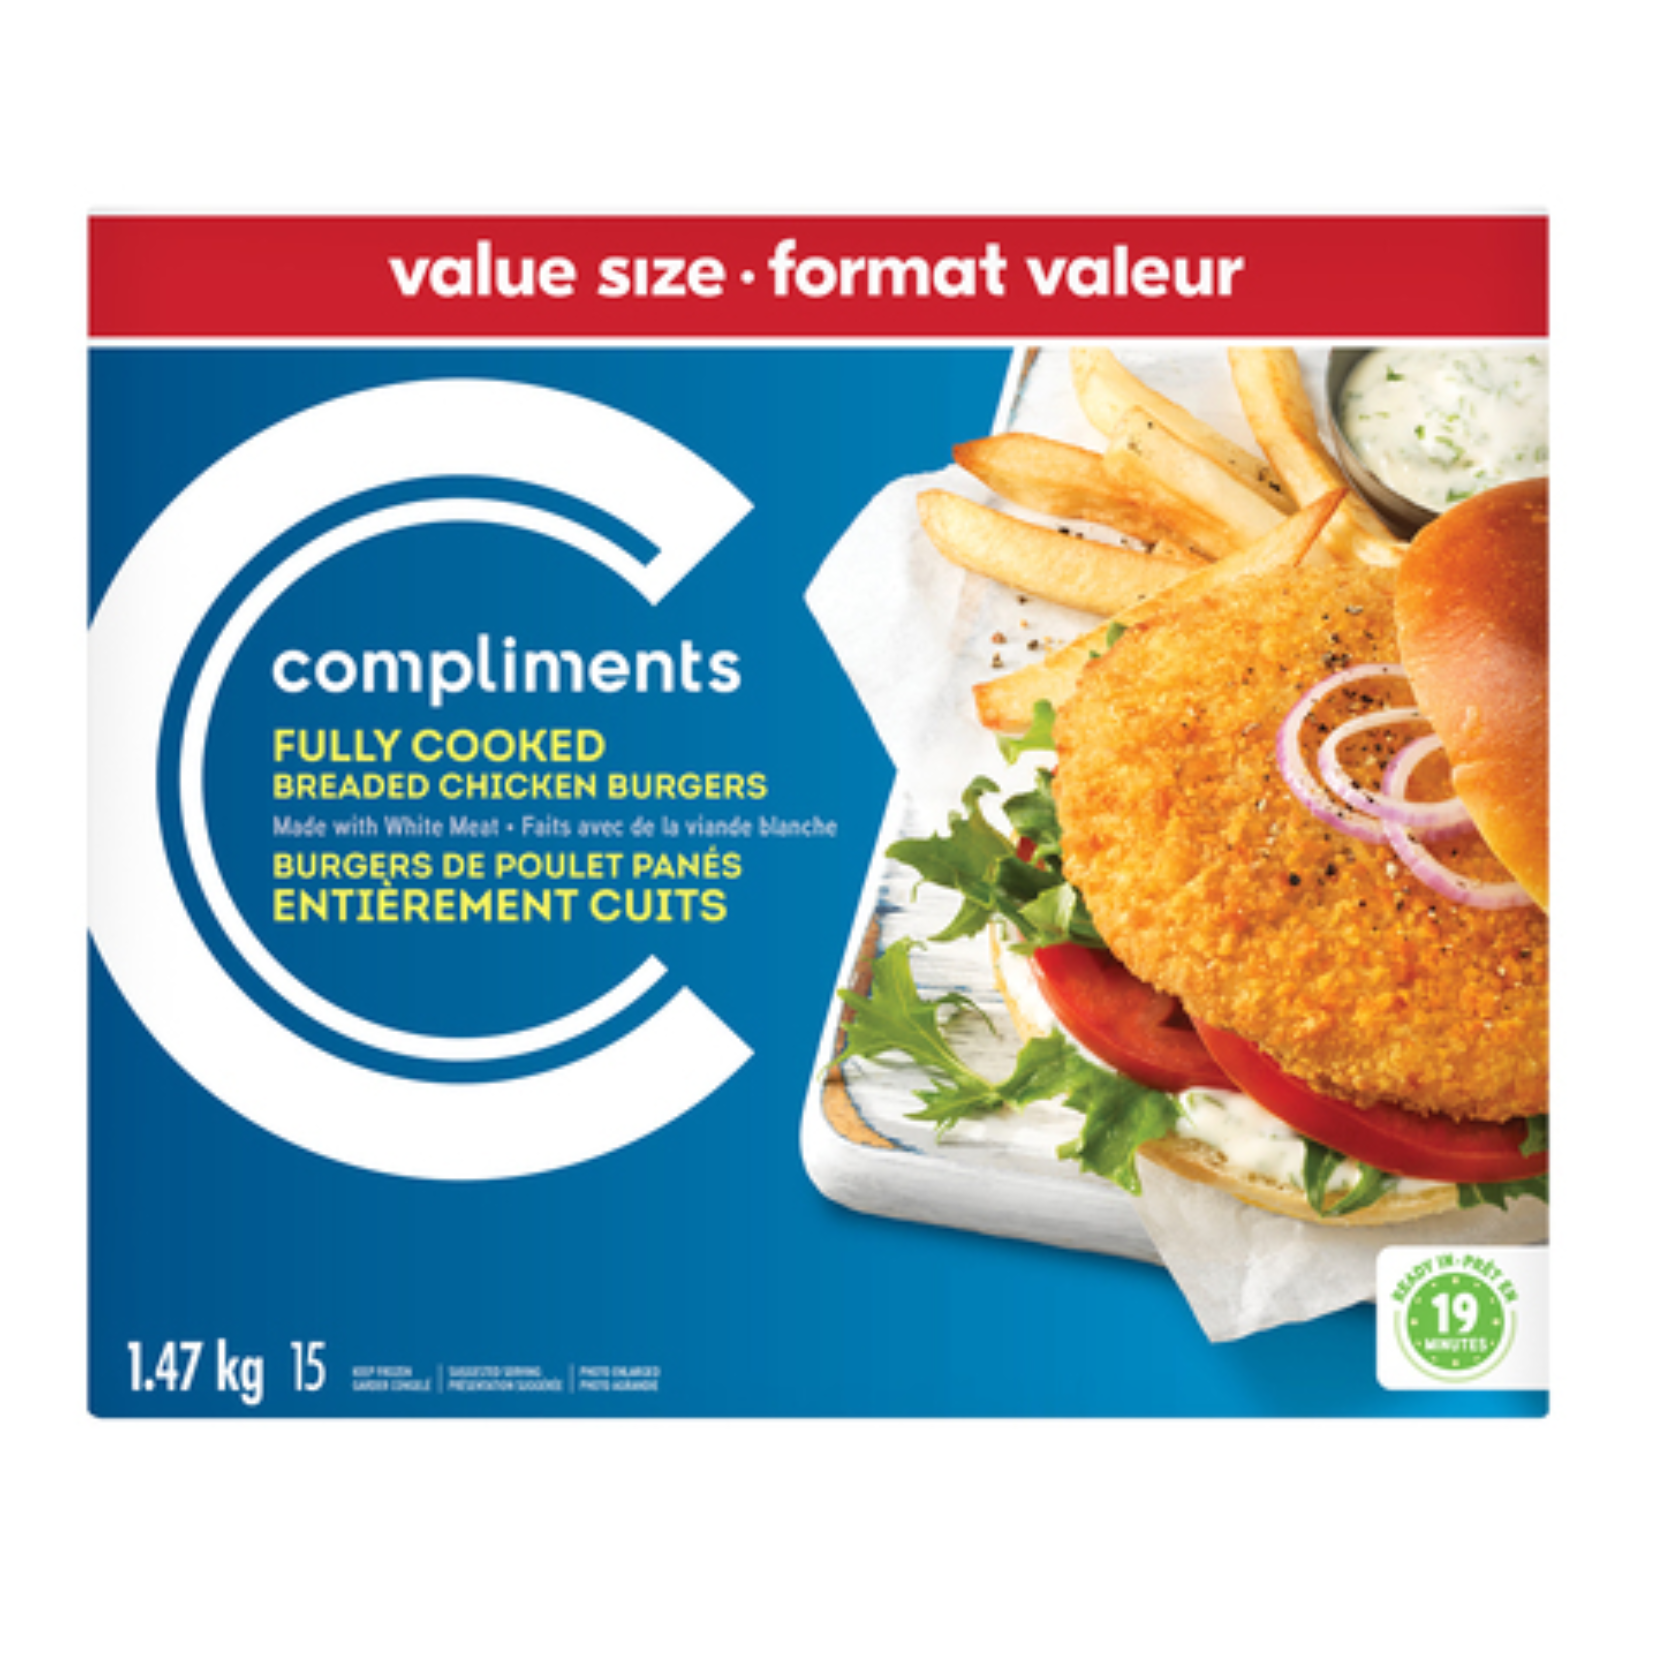 Compliments Breaded Fully Cooked Chicken Burgers 1.47kg